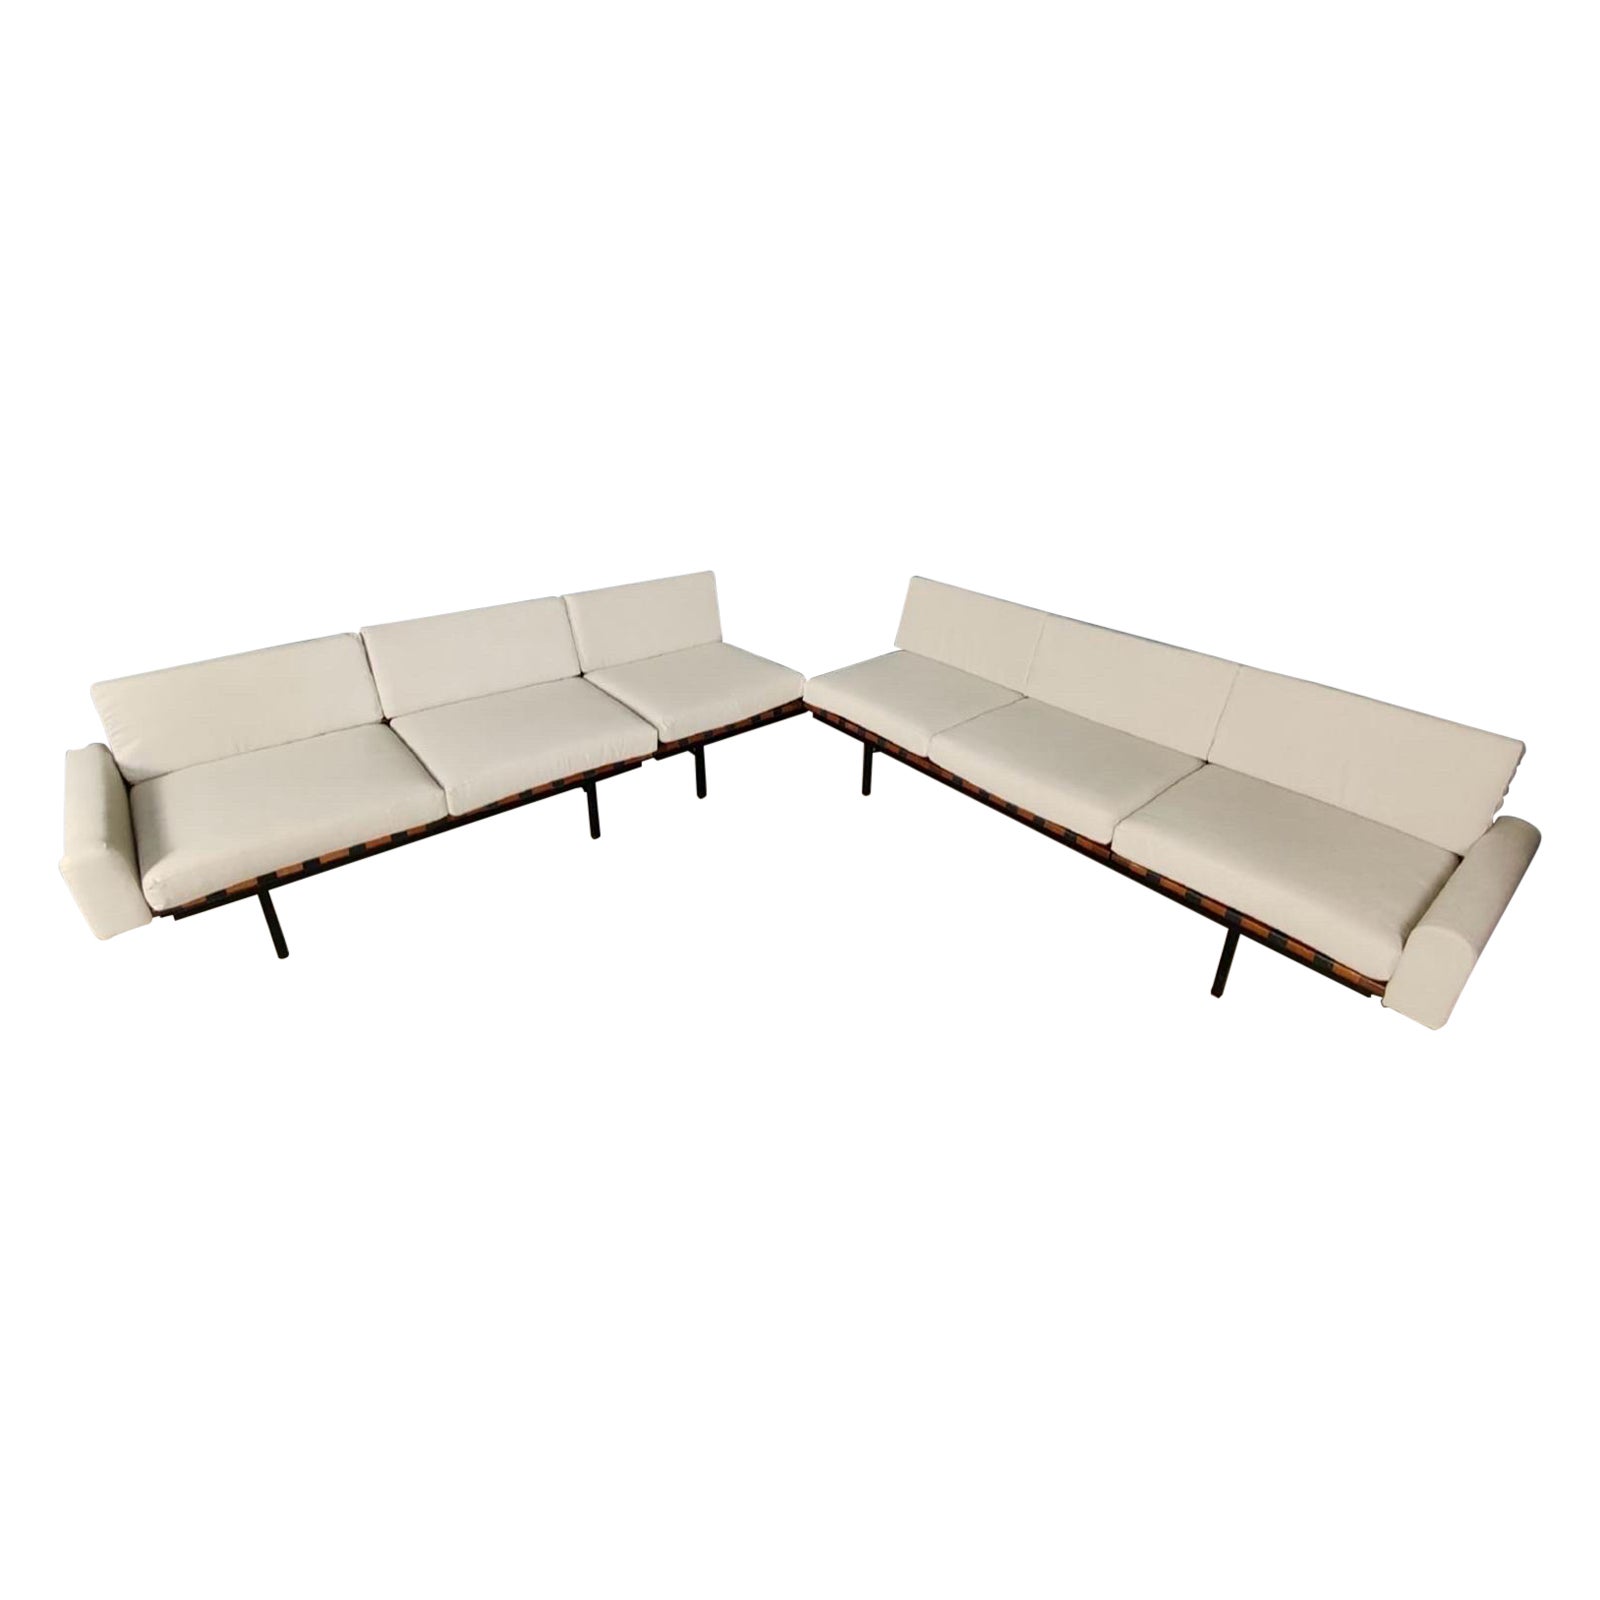 Robin Day For Hille ‘Form Group’ Modular Sectional Sofa Set Settee Mid Century